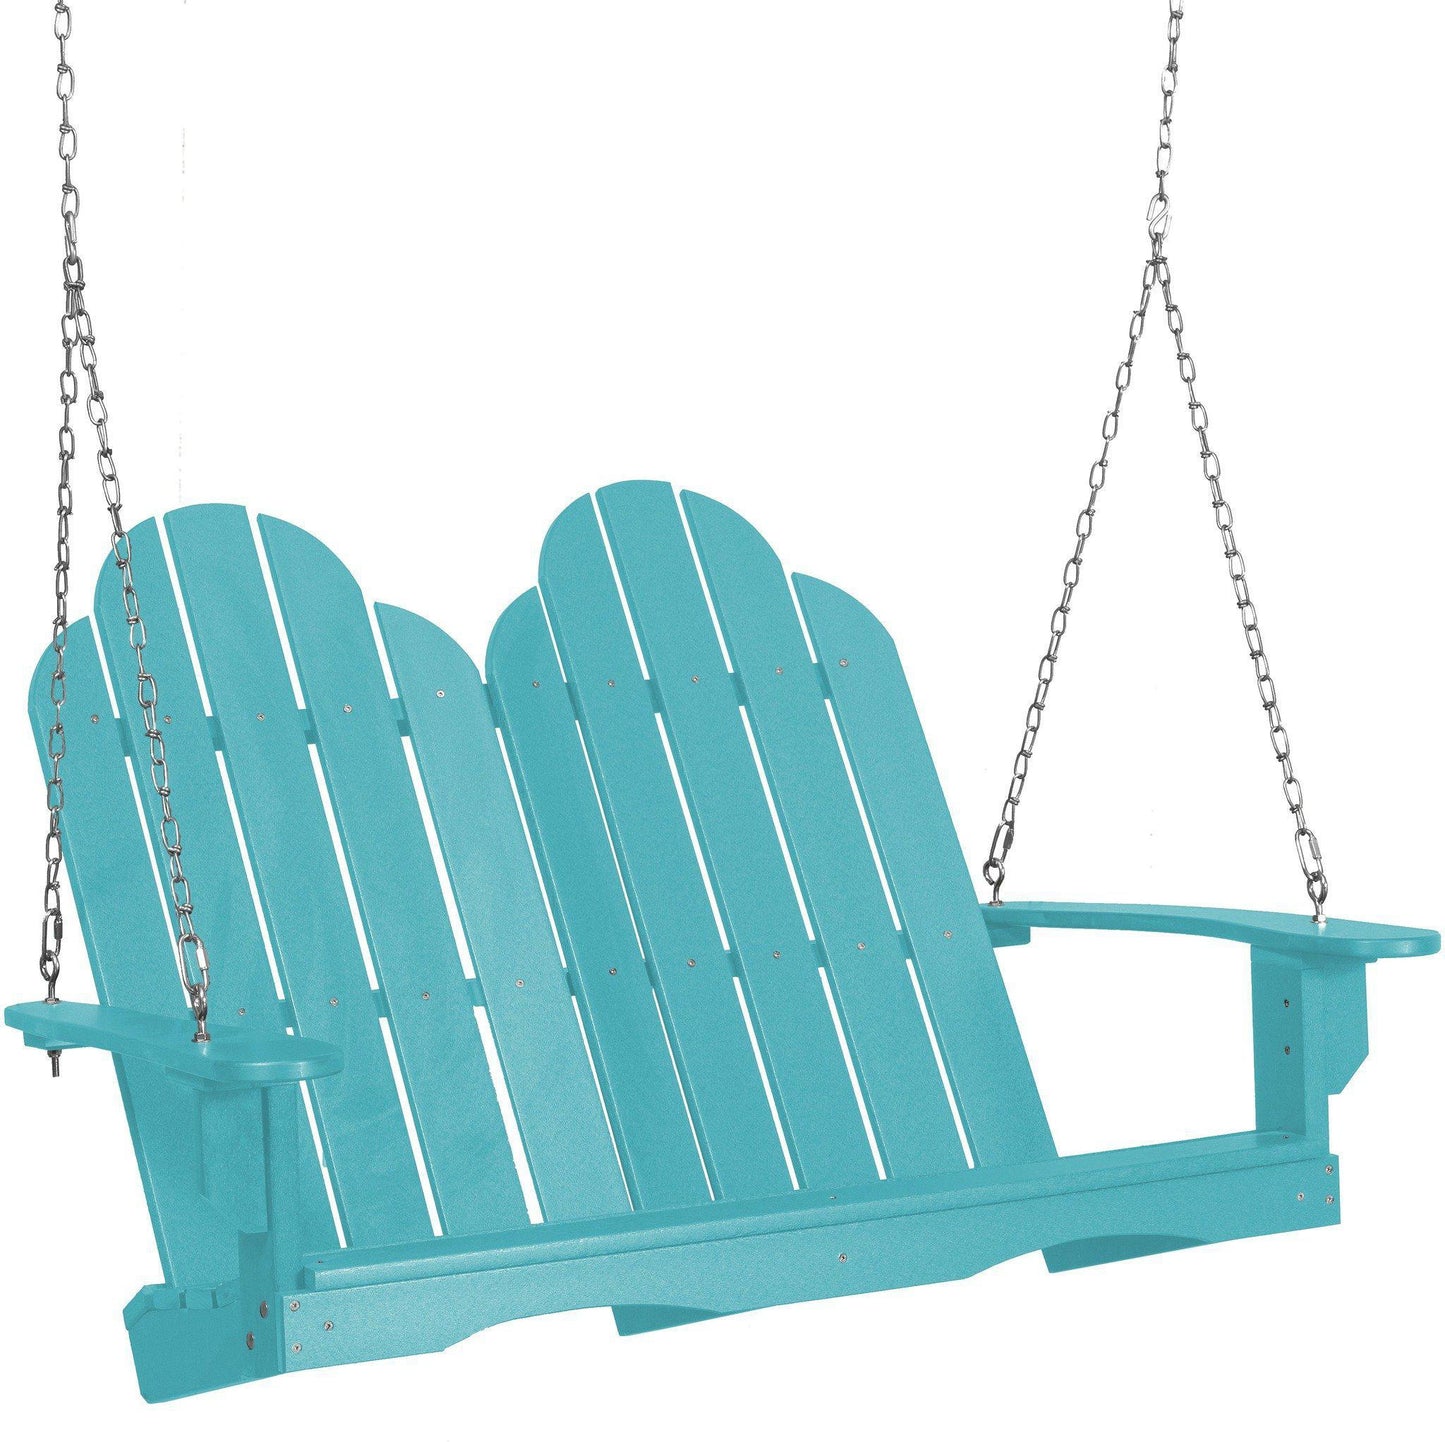 Wildridge Outdoor Recycled Plastic Classic Adirondack 4ft Porch Swing - LEAD TIME TO SHIP 3 WEEKS